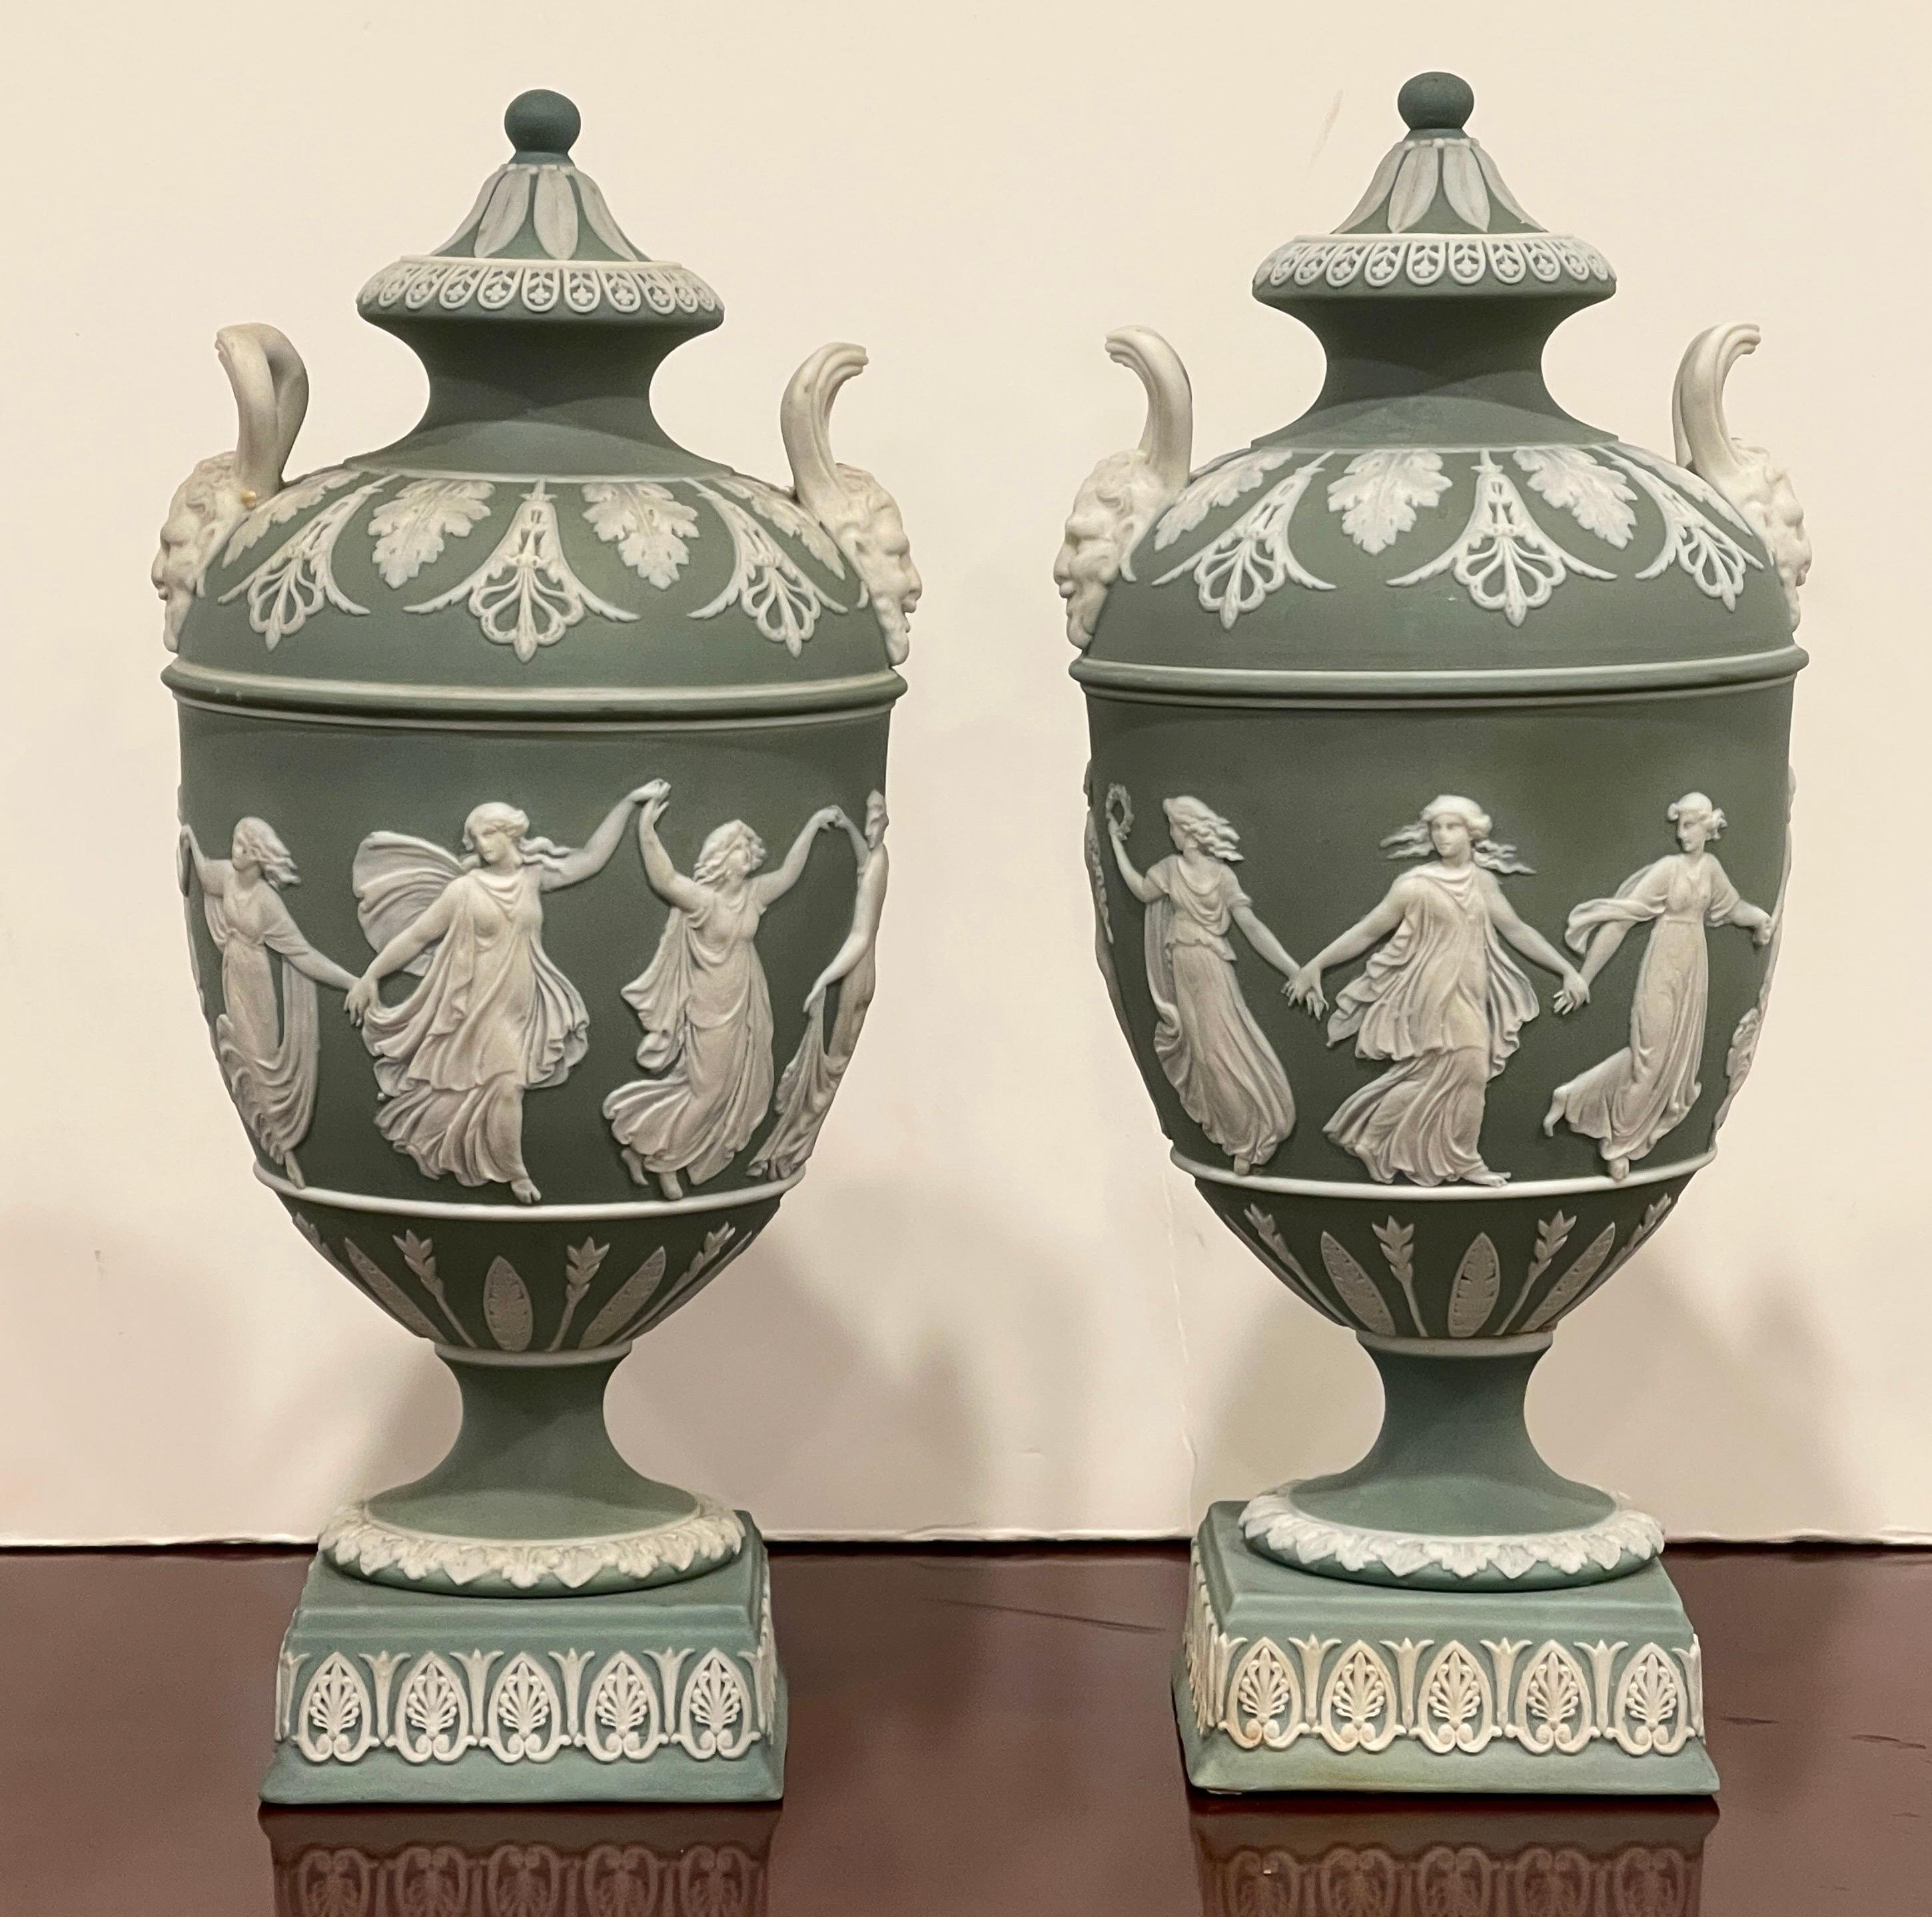 Pair of Wedgwood Olive Basalt ‘Dancing Hours ‘ Vases with Covers
England, Circa 1900s
Stamped 'WEDGWOOD/ Made in England'

A rare pair of Wedgwood olive green jasperware vases with covers, with the 'Dancing Hours' designed by the English